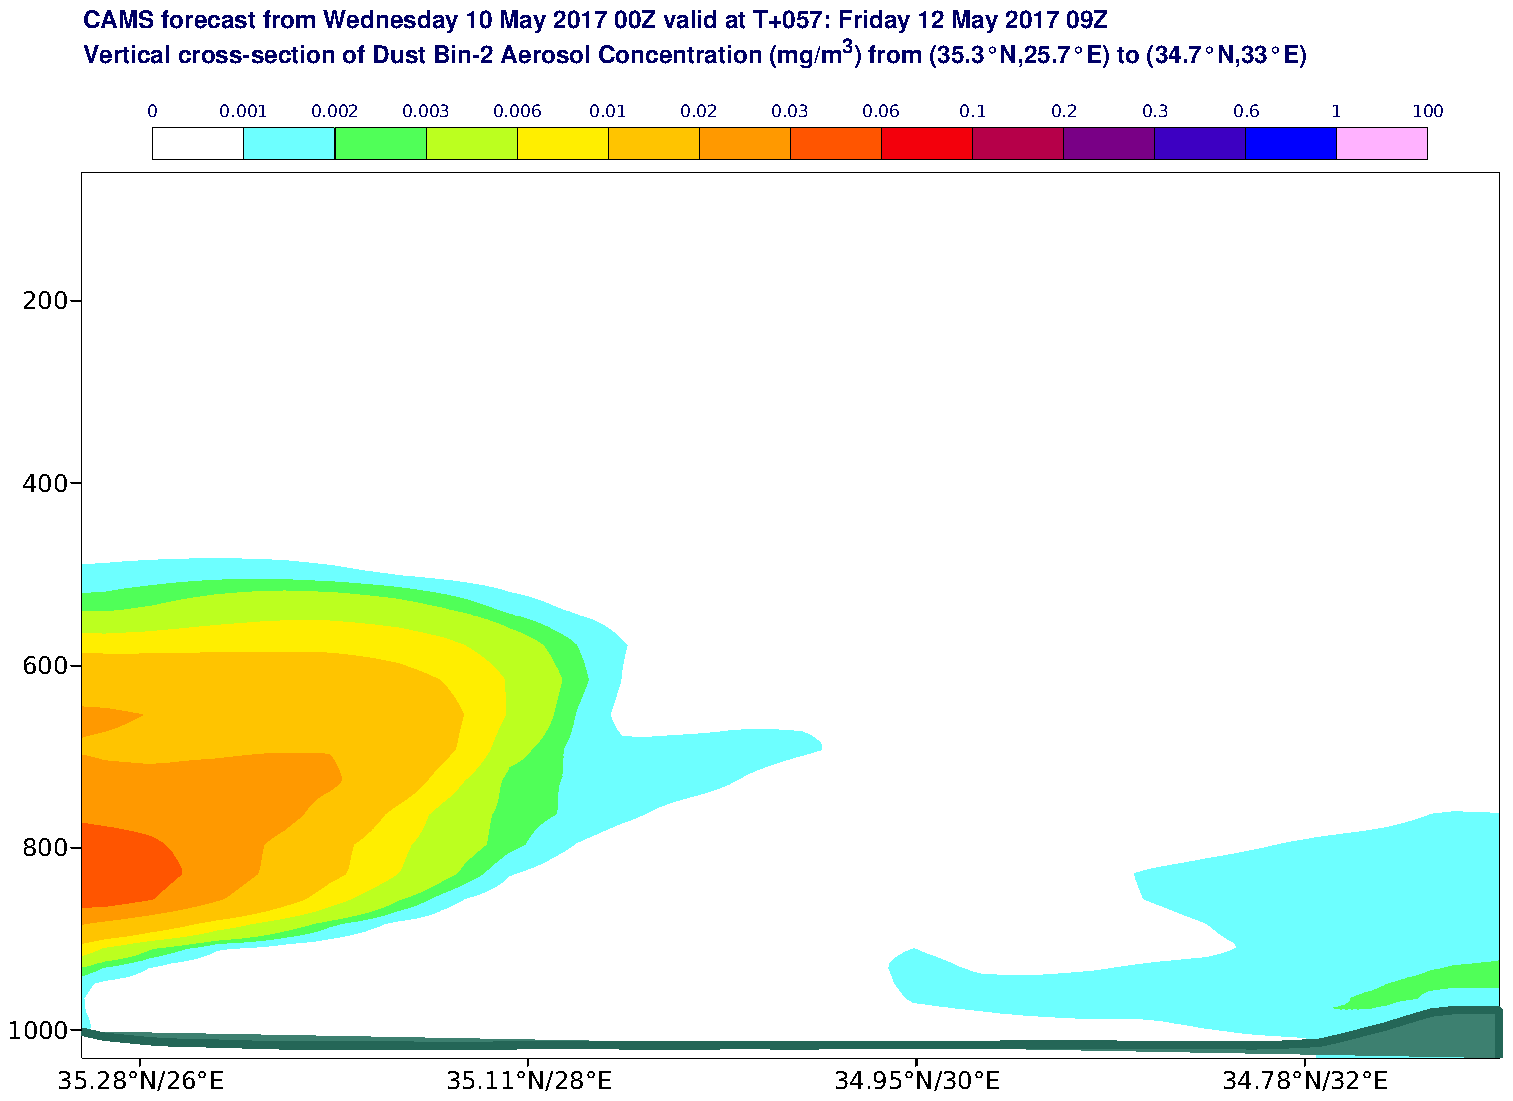 Vertical cross-section of Dust Bin-2 Aerosol Concentration (mg/m3) valid at T57 - 2017-05-12 09:00